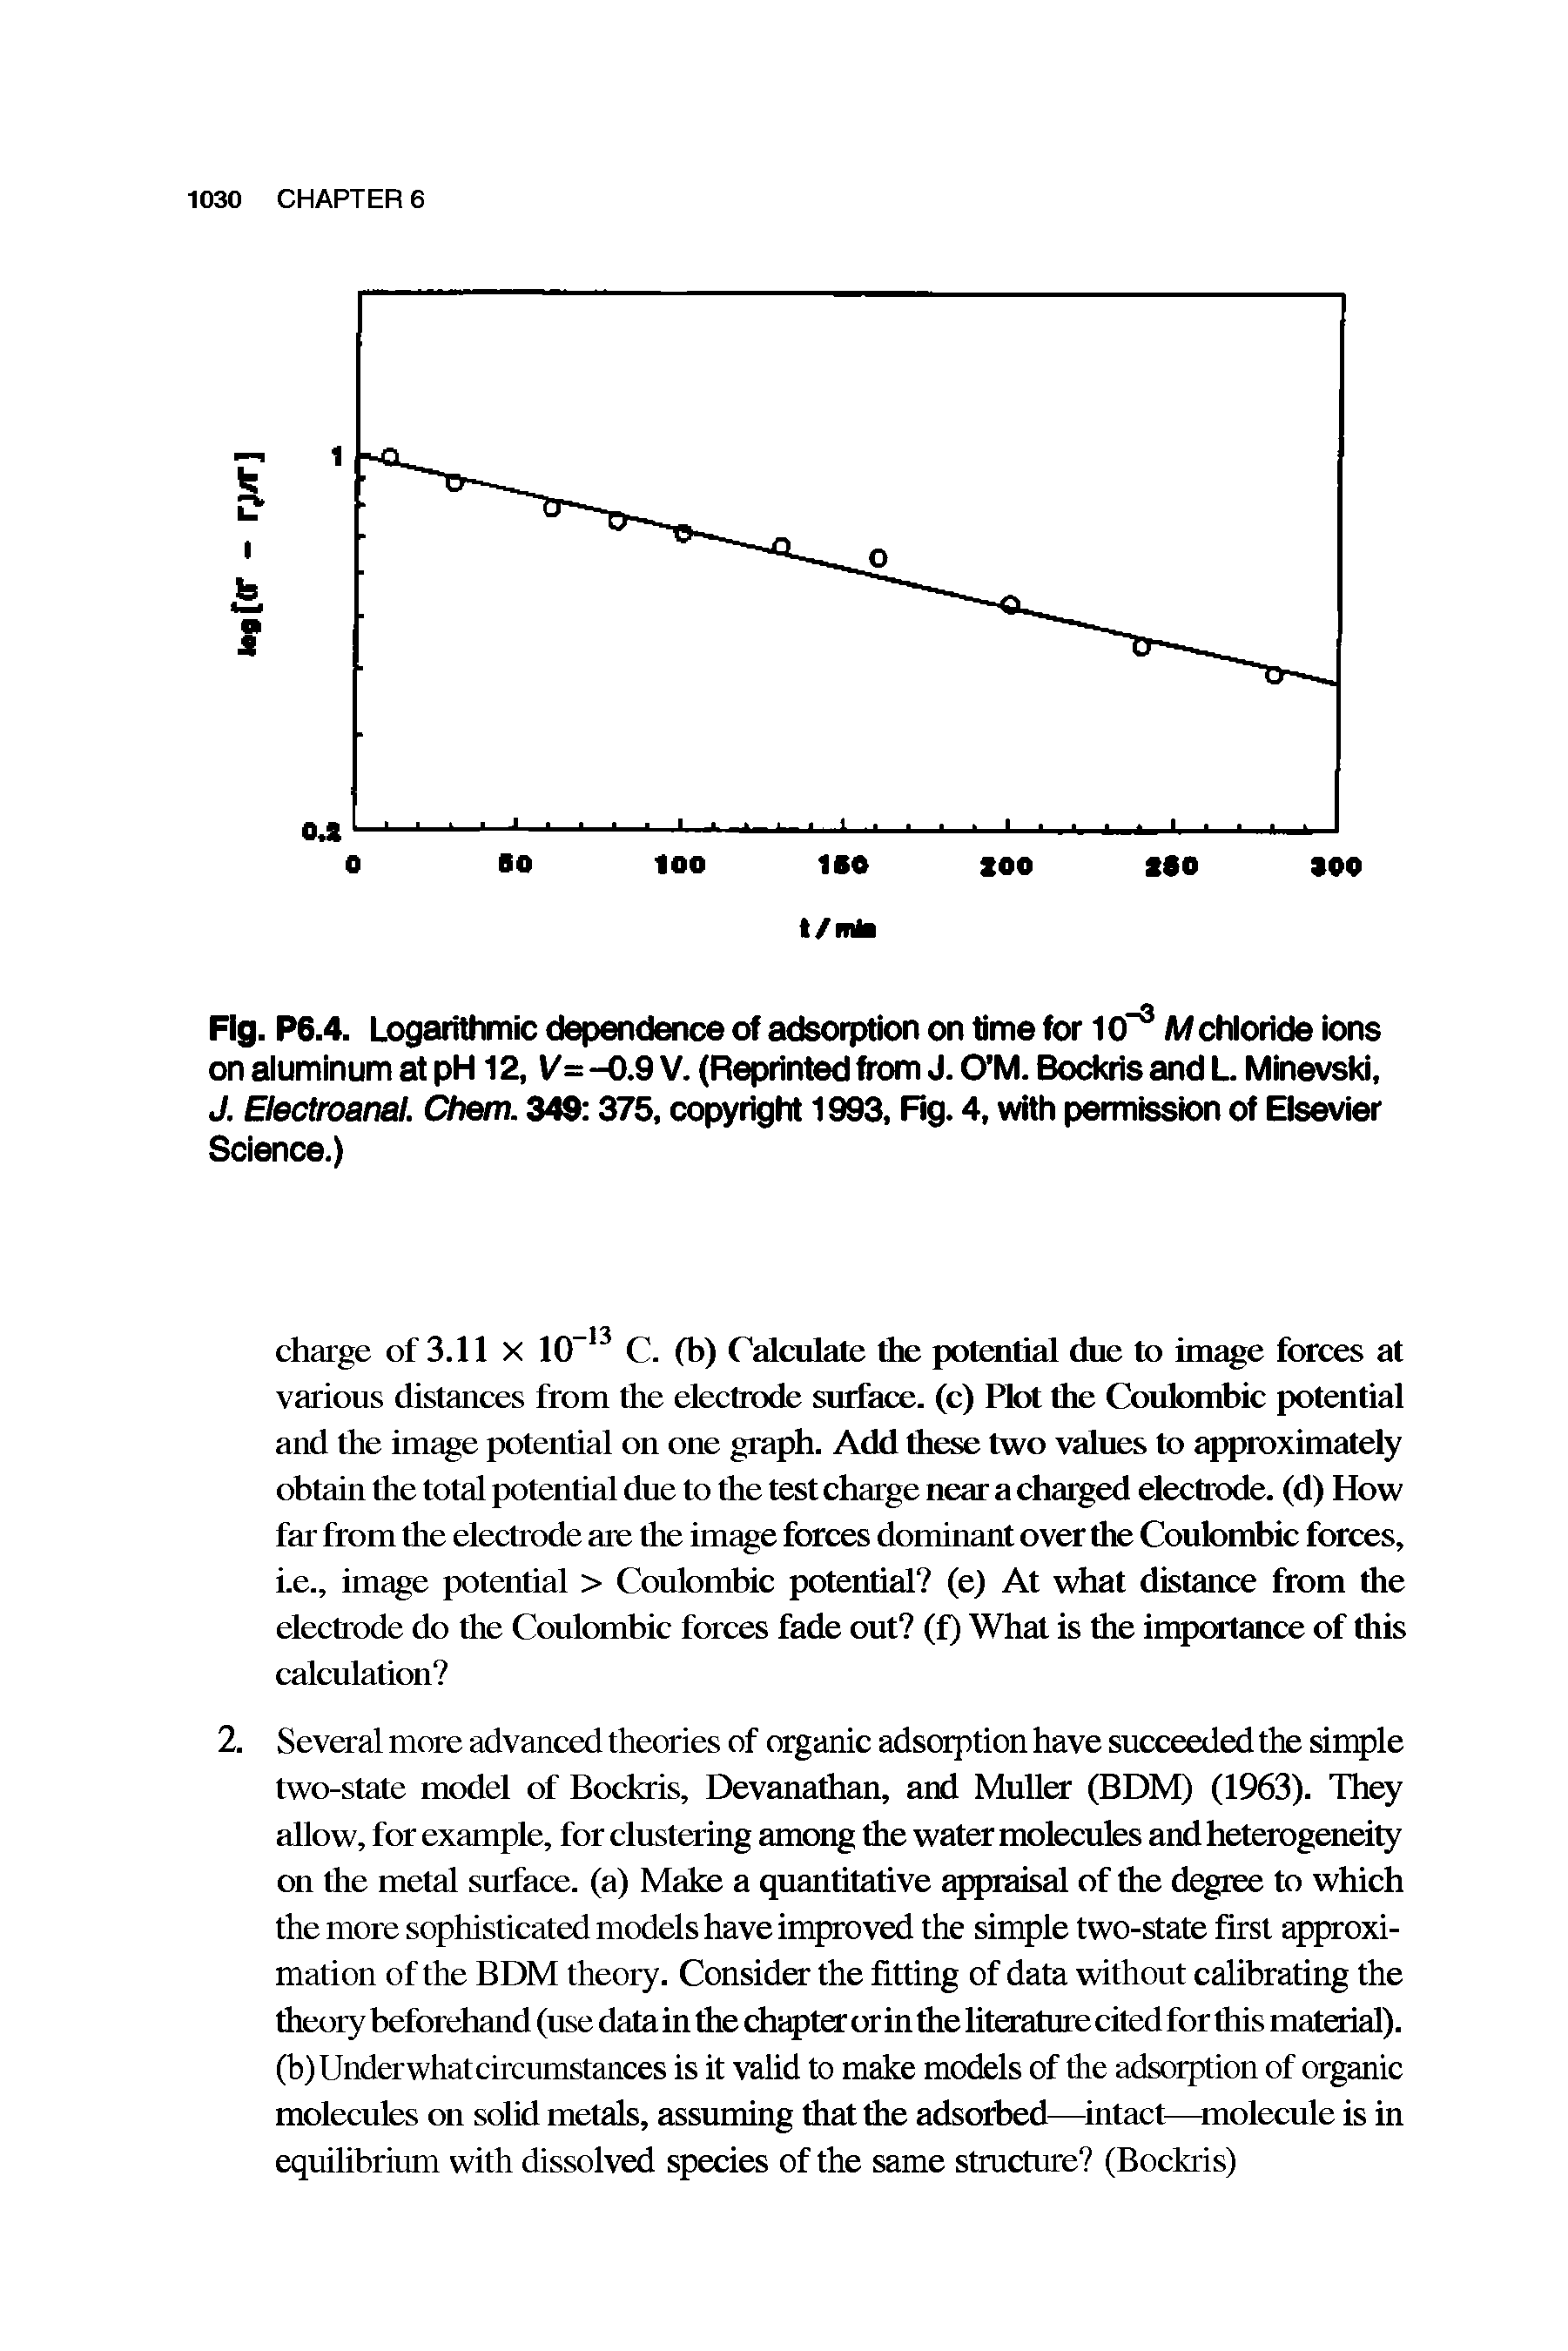 Fig. P6.4. Logarithmic dependence of adsorption on time for 10-3 M chloride ions on aluminum at pH 12, V= -0.9 V. (Reprinted from J. O M. Bockris and L. Minevski, J. Electroanal. Chem. 349 375, copyright 1993, Fig. 4, with permission of Elsevier Science.)...